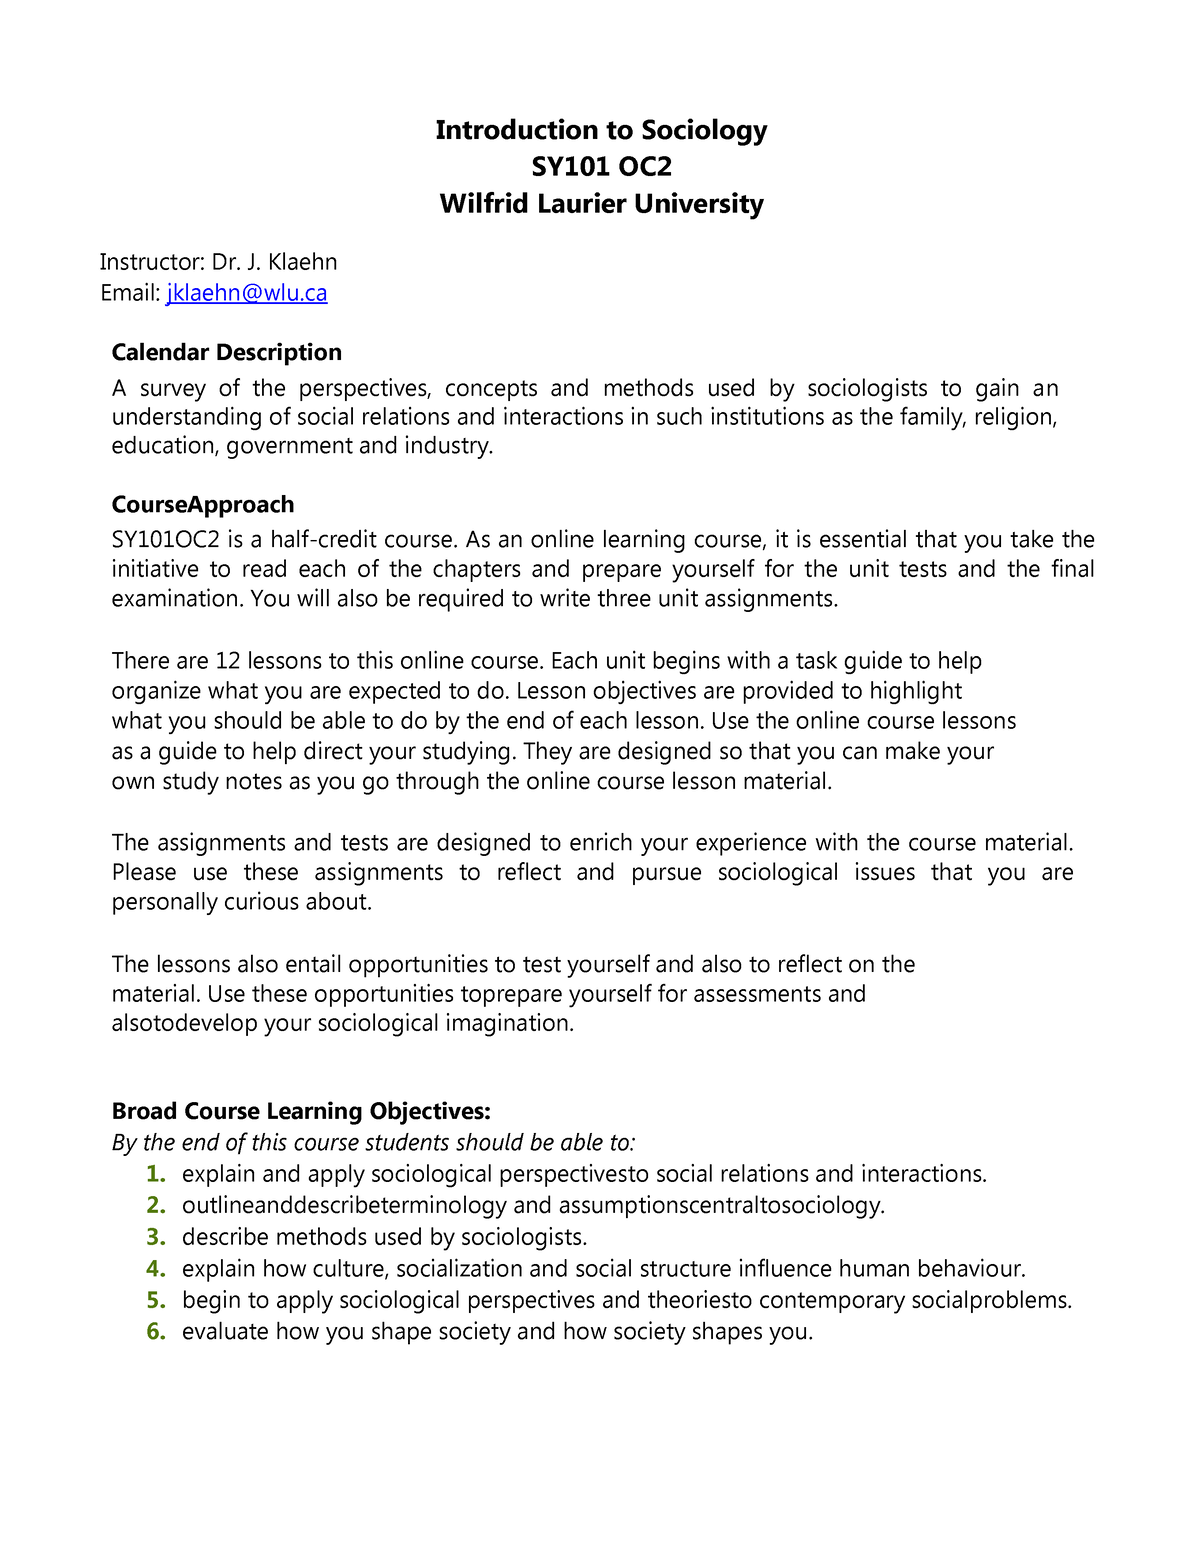 Class Notes for SY101 at Wilfrid Laurier University (WLU)